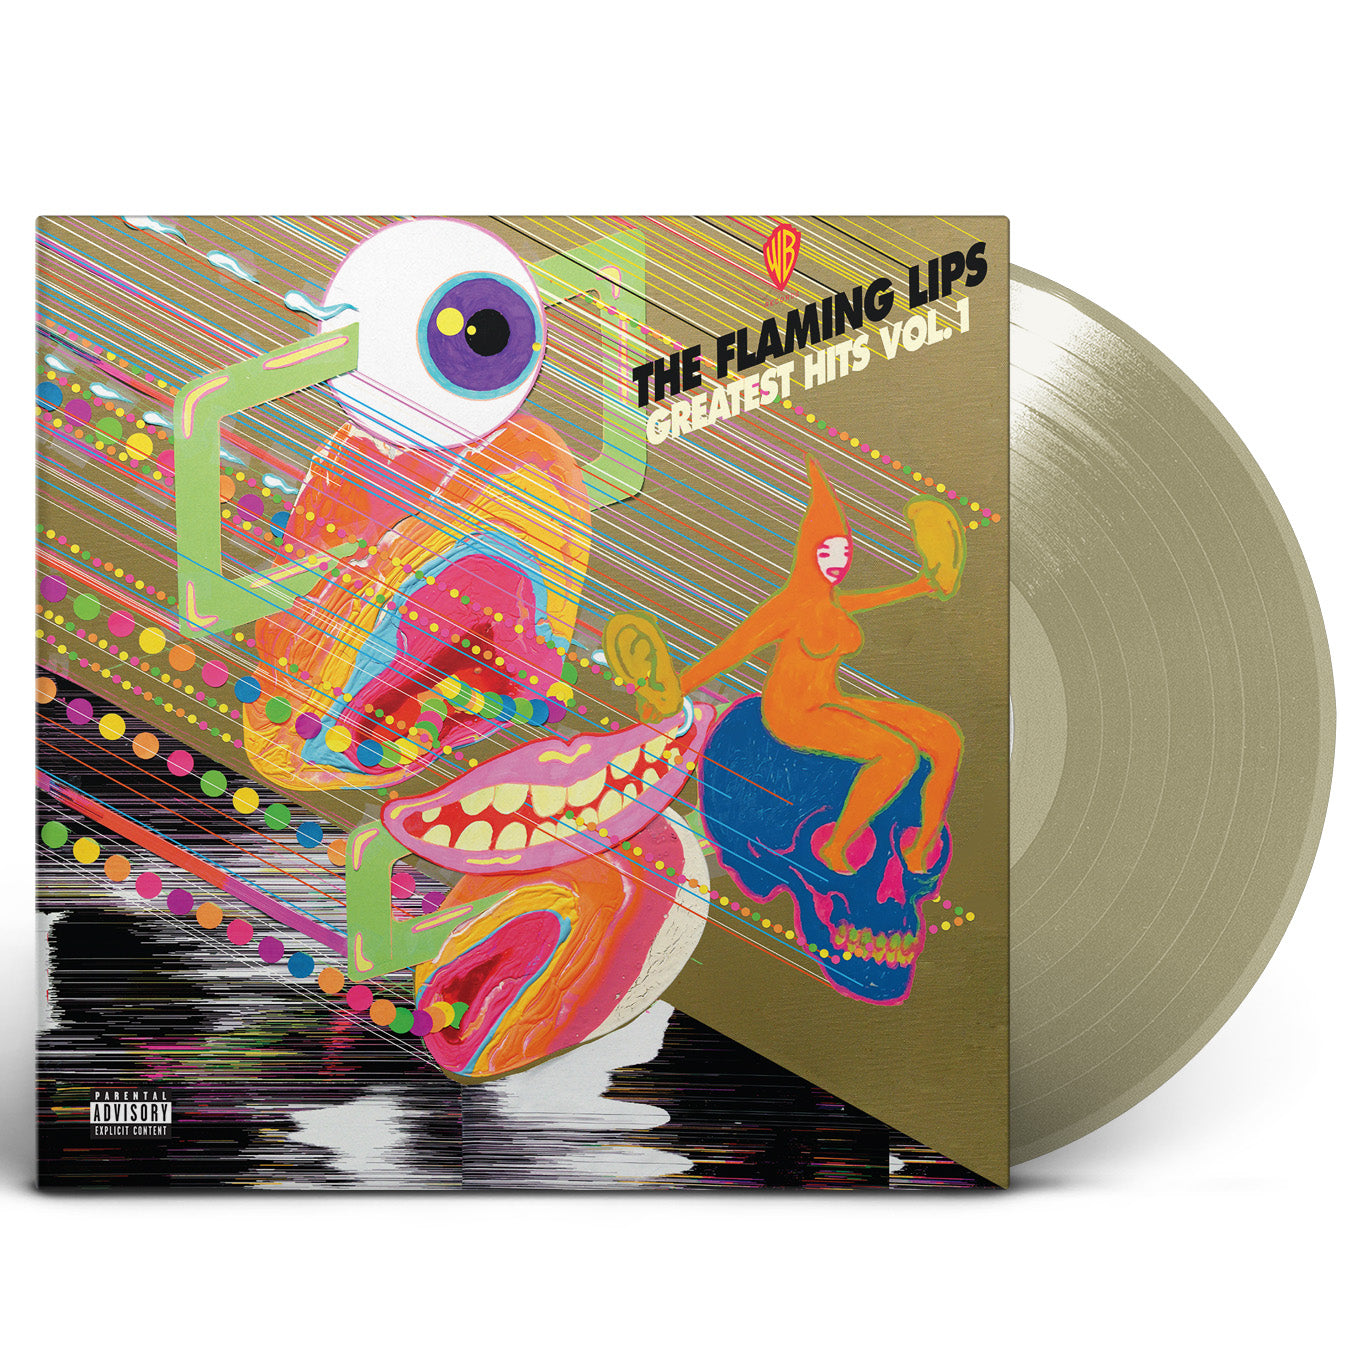 The Flaming Lips - Greatest Hits, Vol. 1: Limited Gold Colour